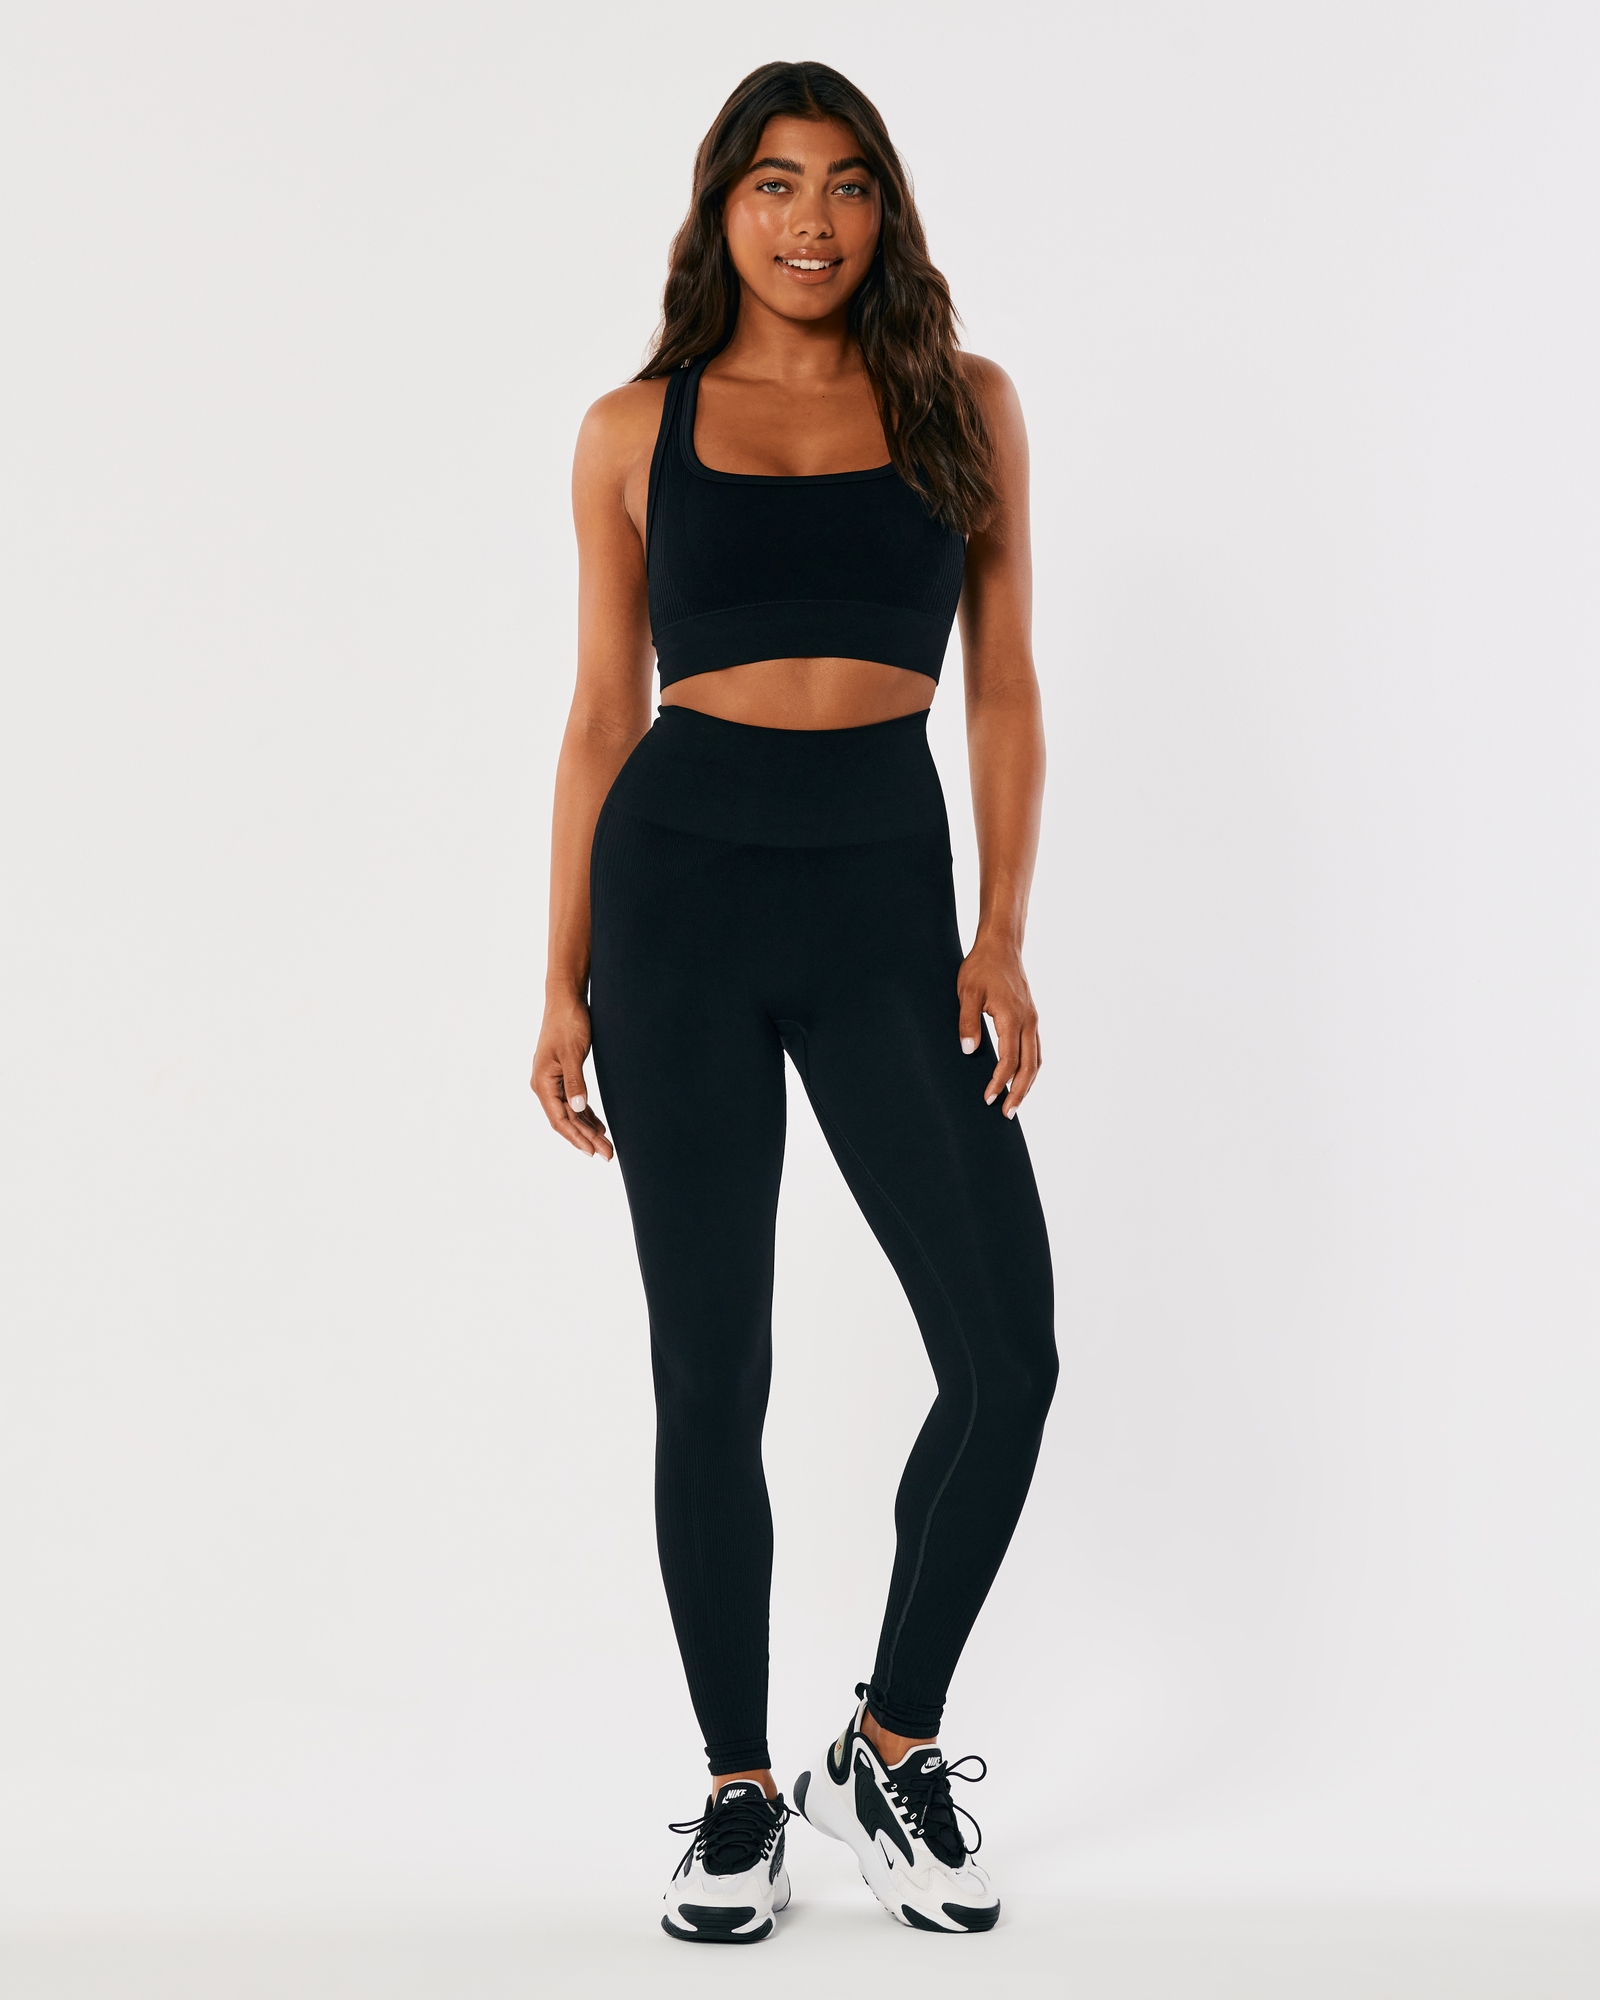 Hollister Gilly Hicks Go Seamless One-shoulder Sports Bra in